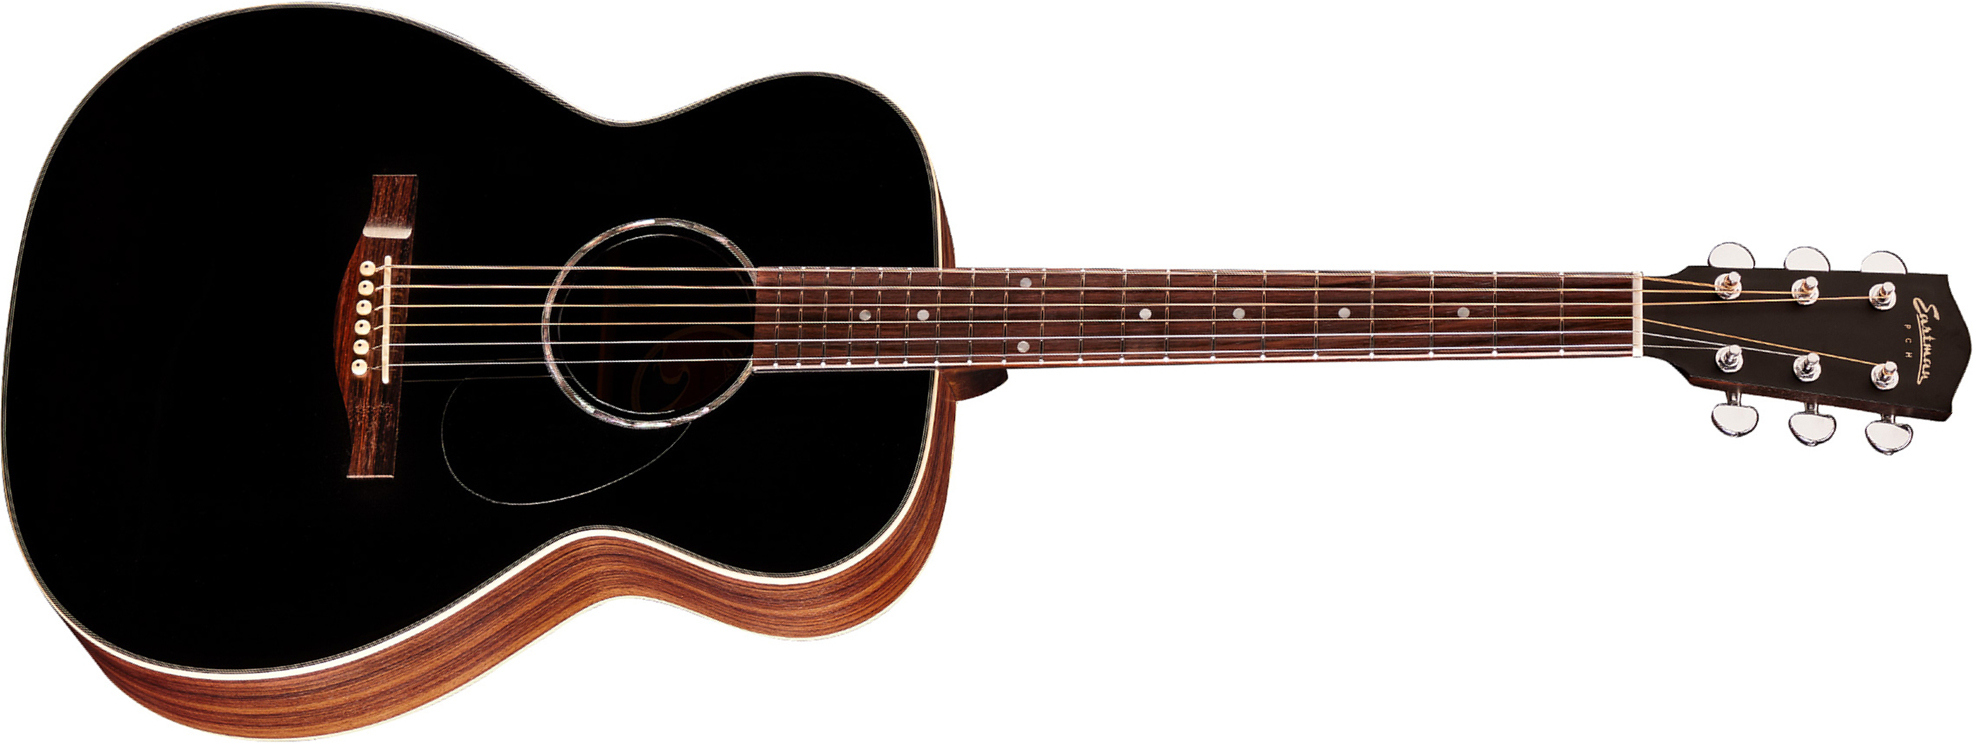 Eastman Pch2-om Orchestra Model Epicea Palissandre Rw - Black - Westerngitaar & electro - Main picture